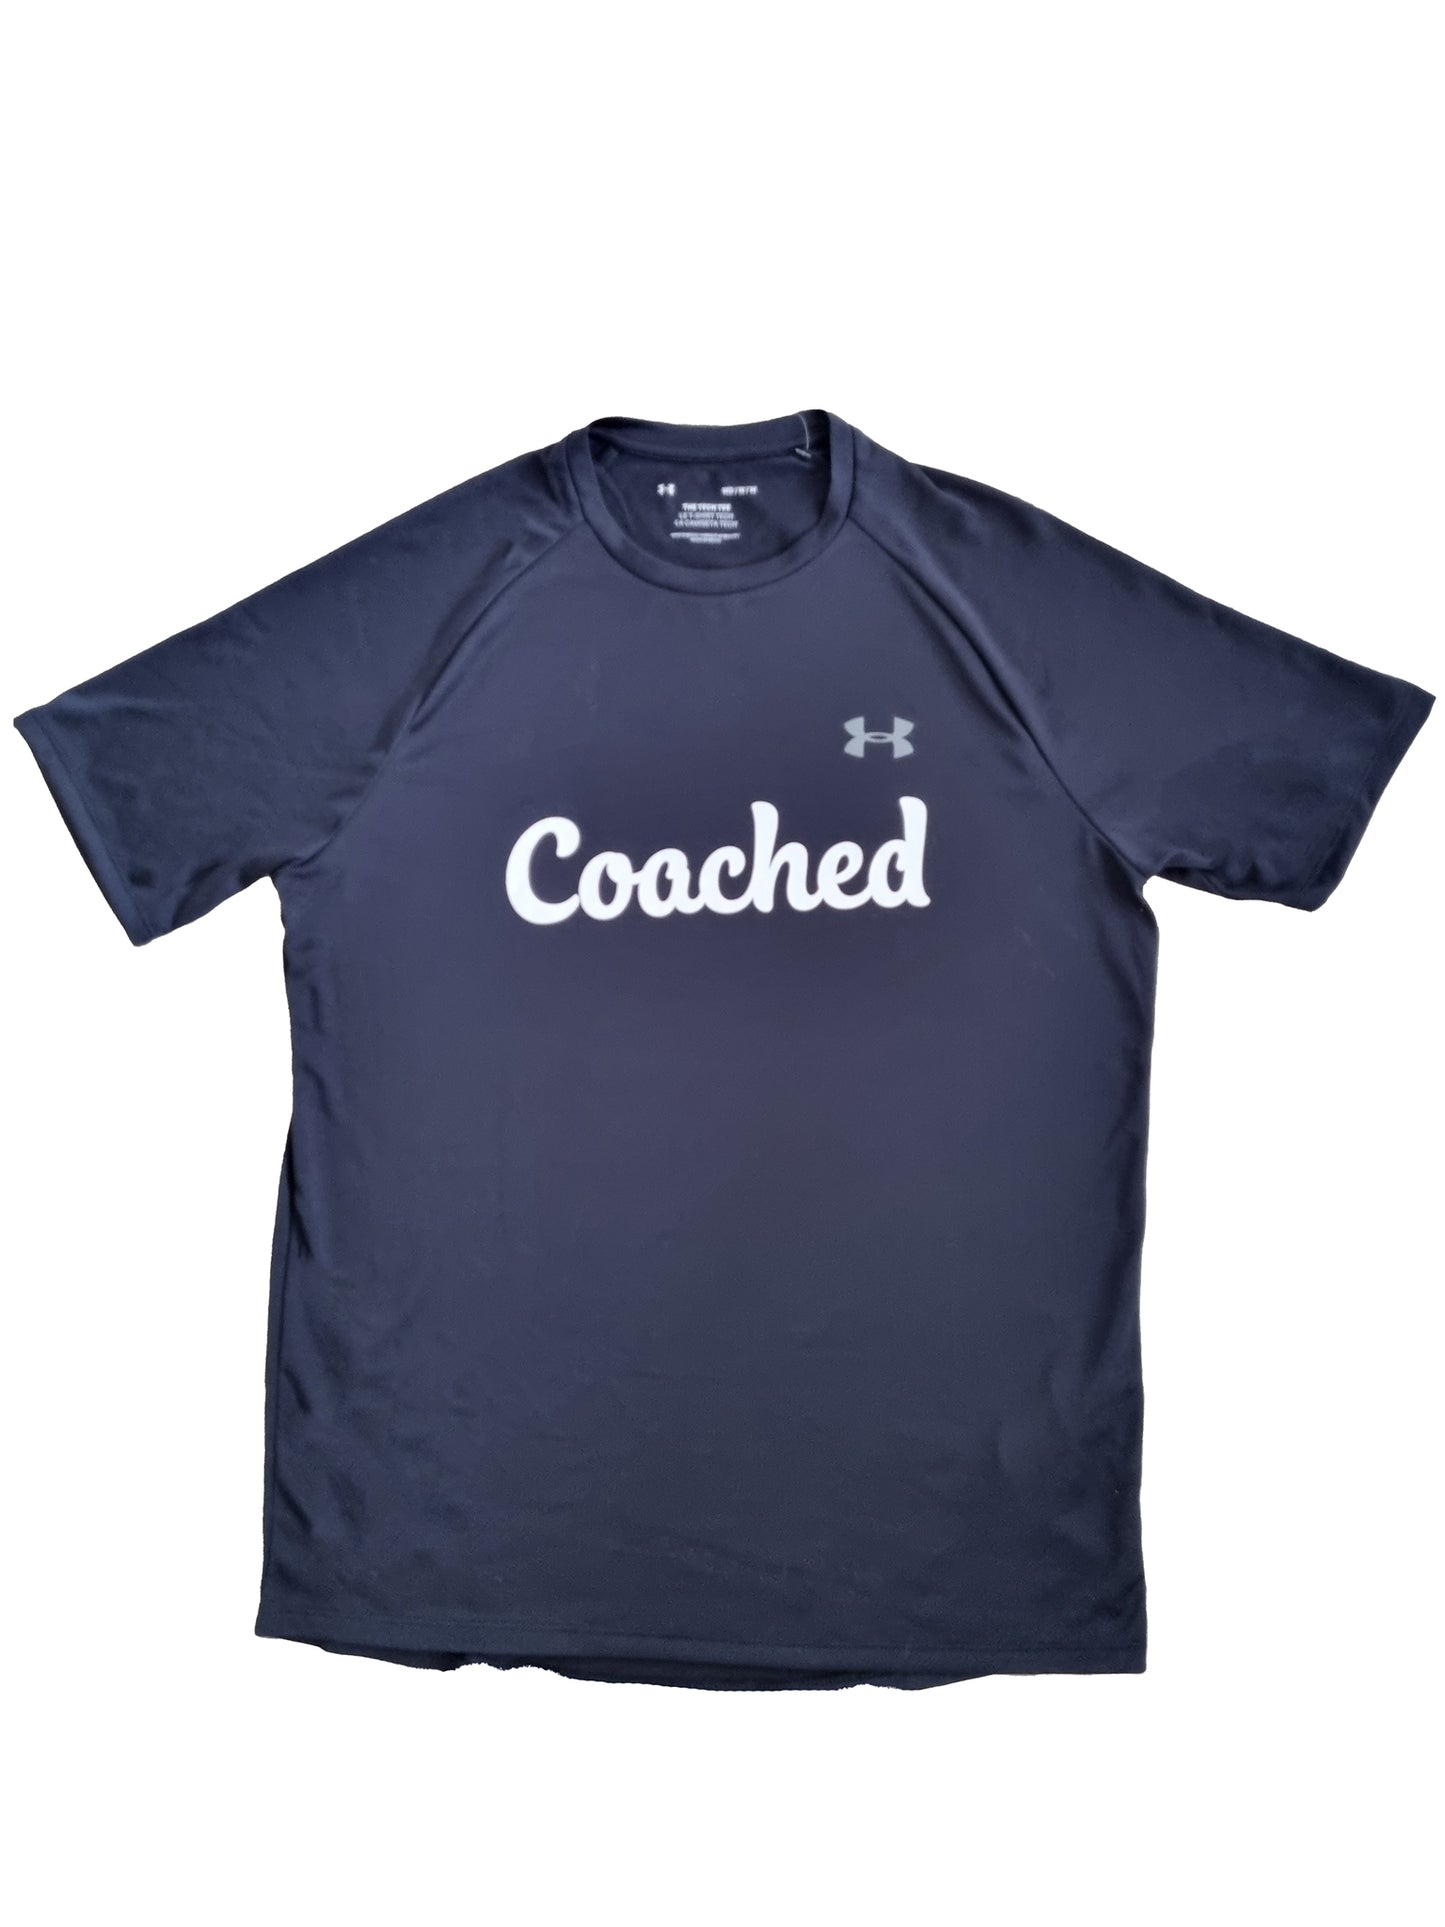 Coached Under Armour Team Tee